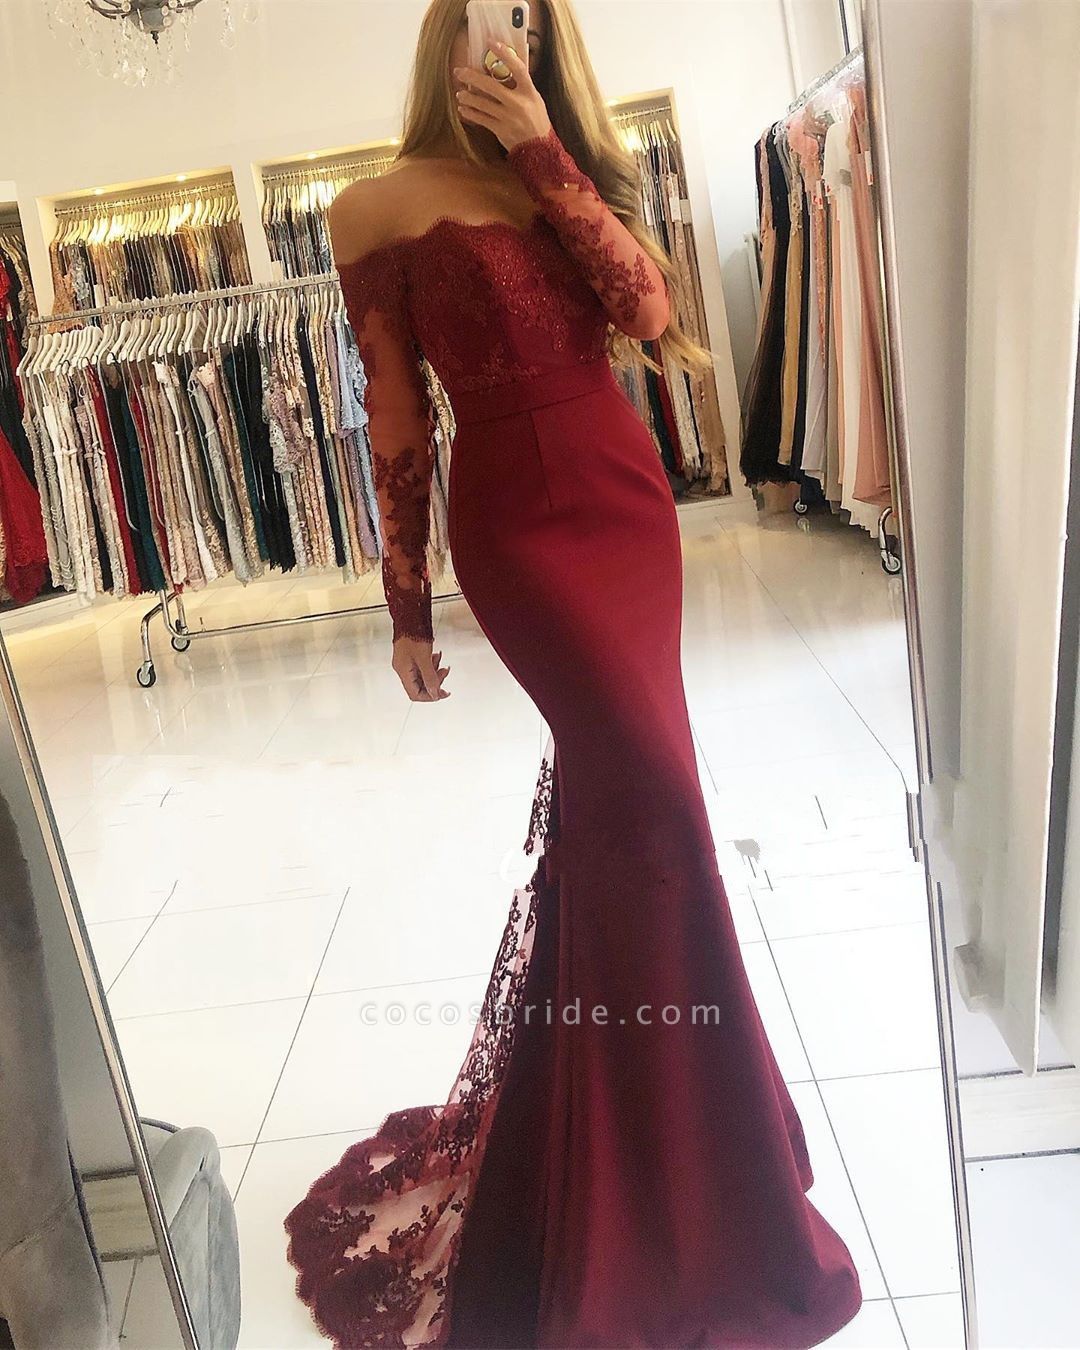 Dignified Red Strapless Long Sleeve Transparent Lace Mermaid Prom Dresses